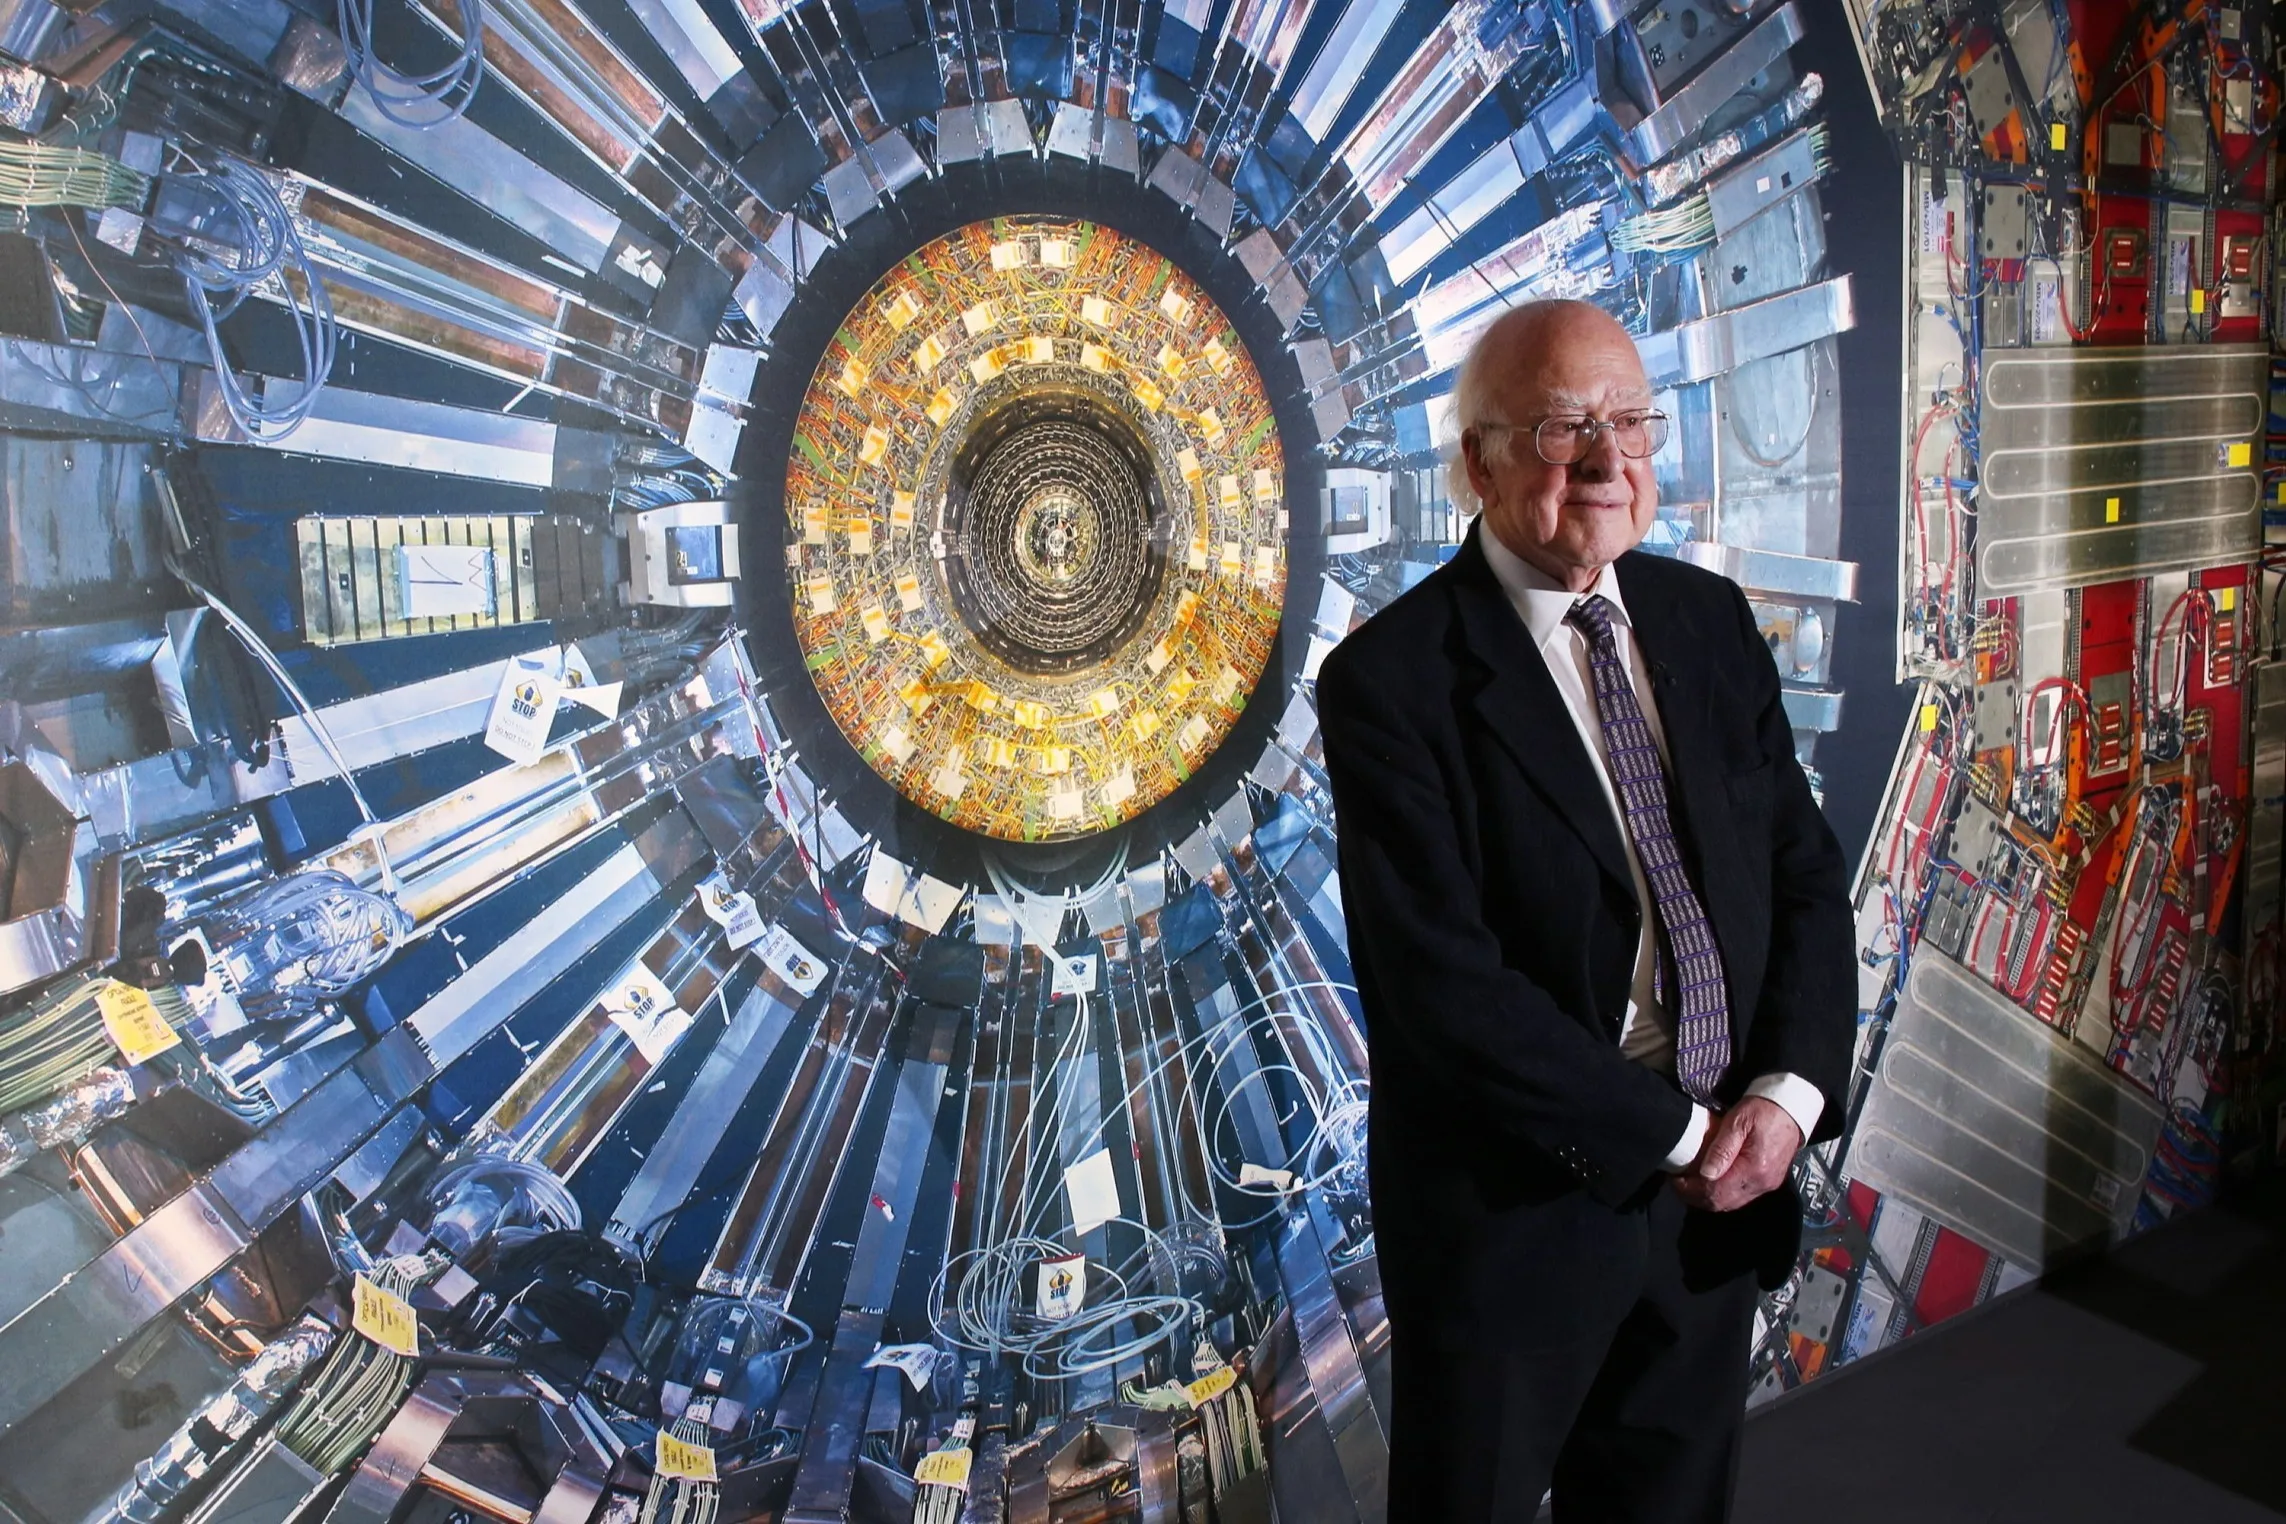 A man in a suit stands in front of a photograph of the Large Hadron Collider at the科学Museum 